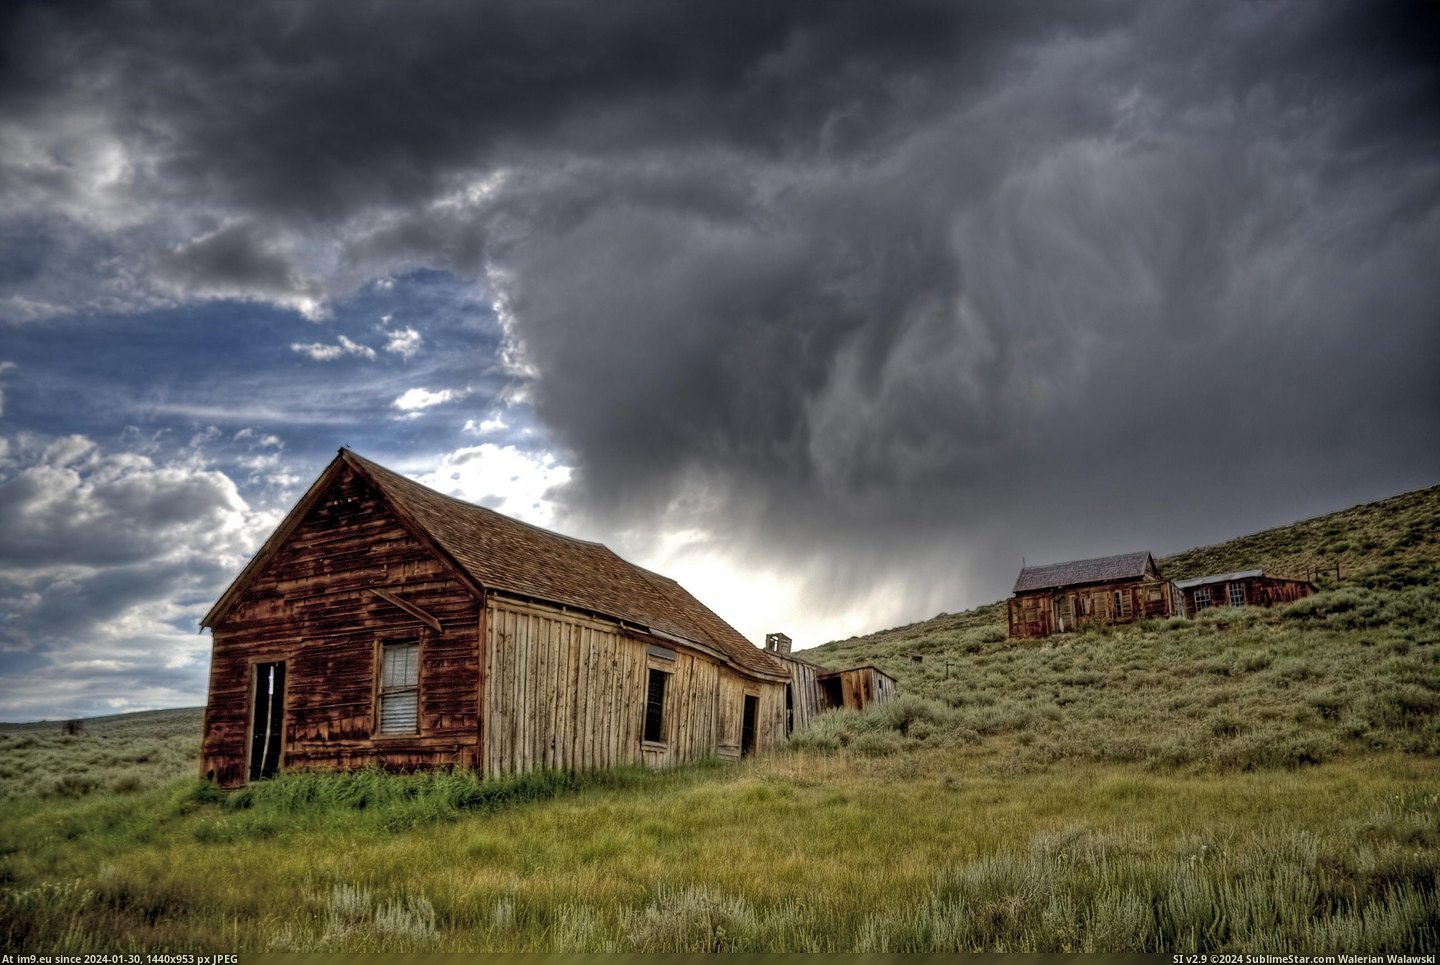 #Town #Ghost #Bodie #Storm Bodie Ghost Town Storm Pic. (Изображение из альбом Bodie - a ghost town in Eastern California))